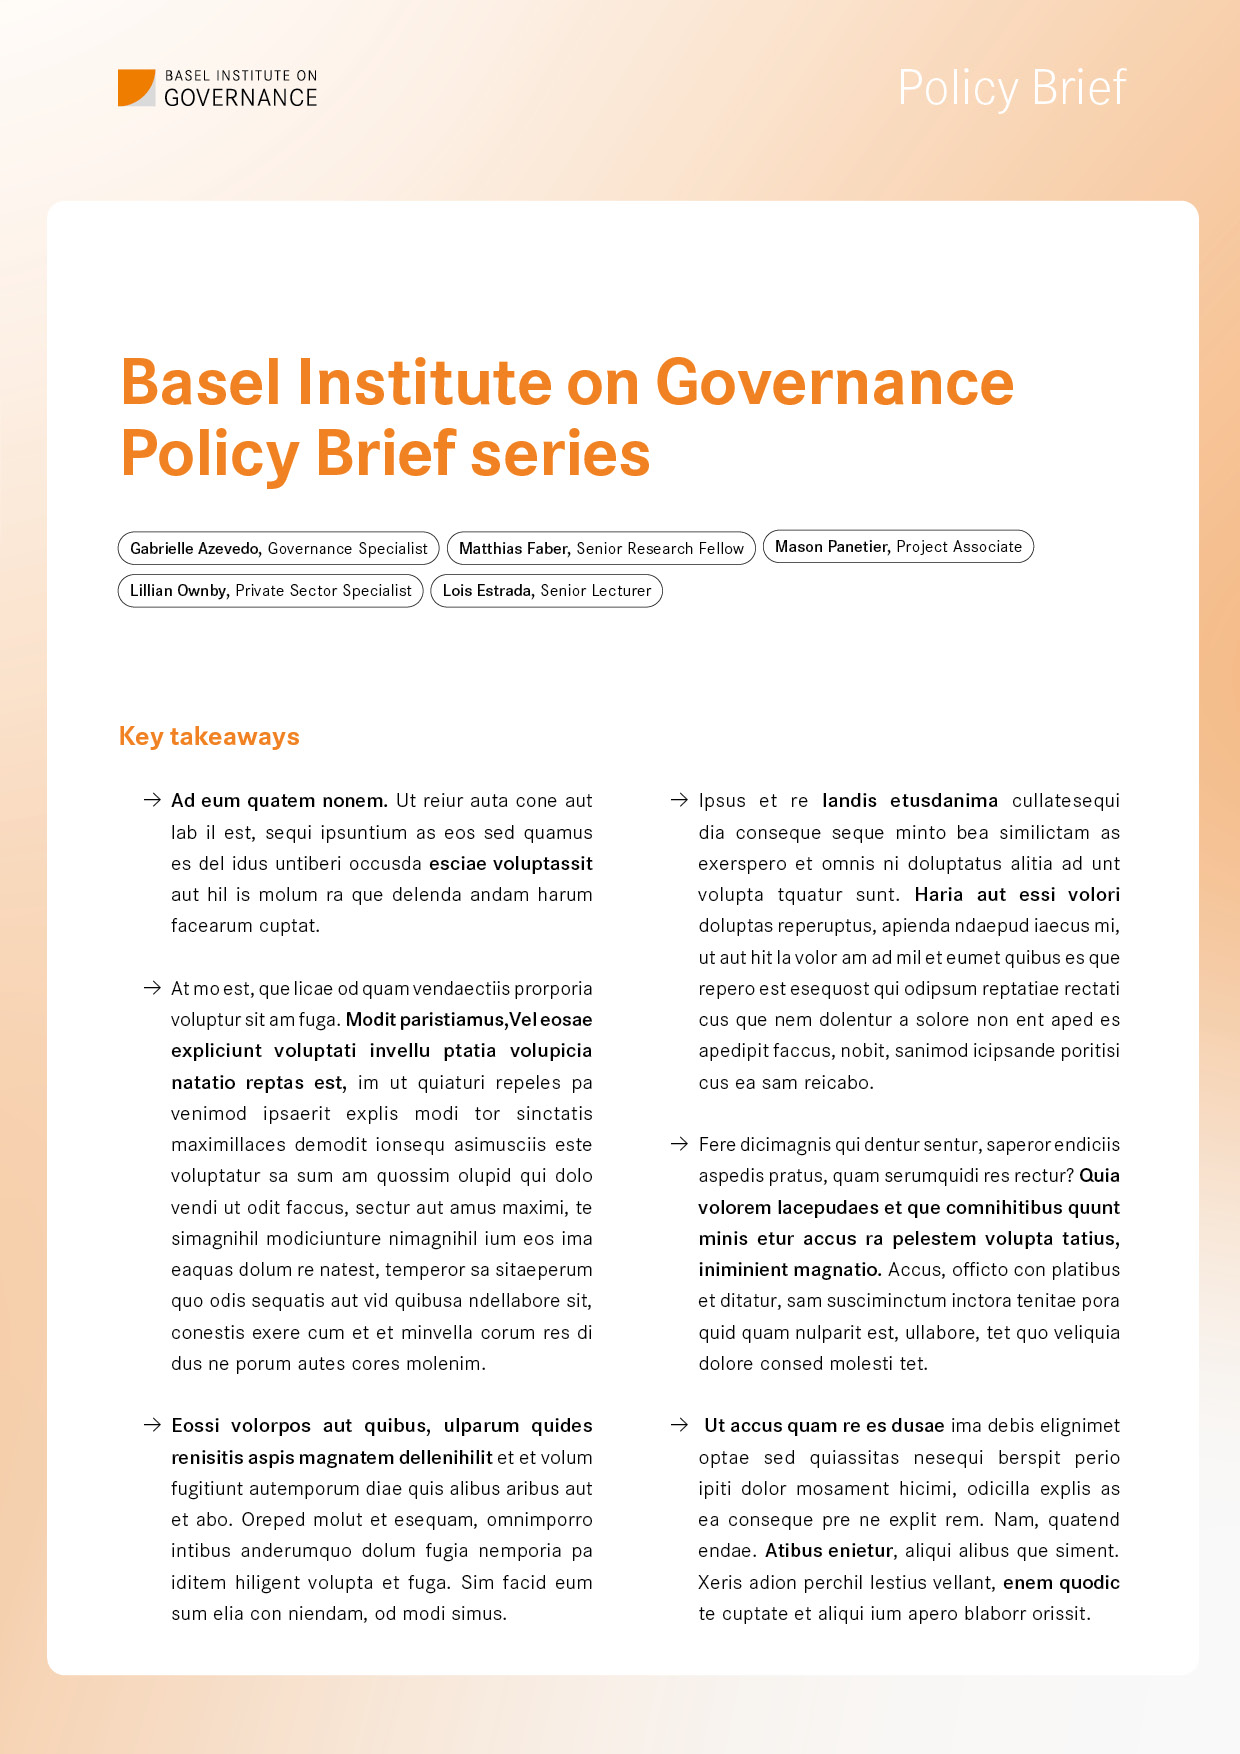 Basel Institute Policy Brief series cover